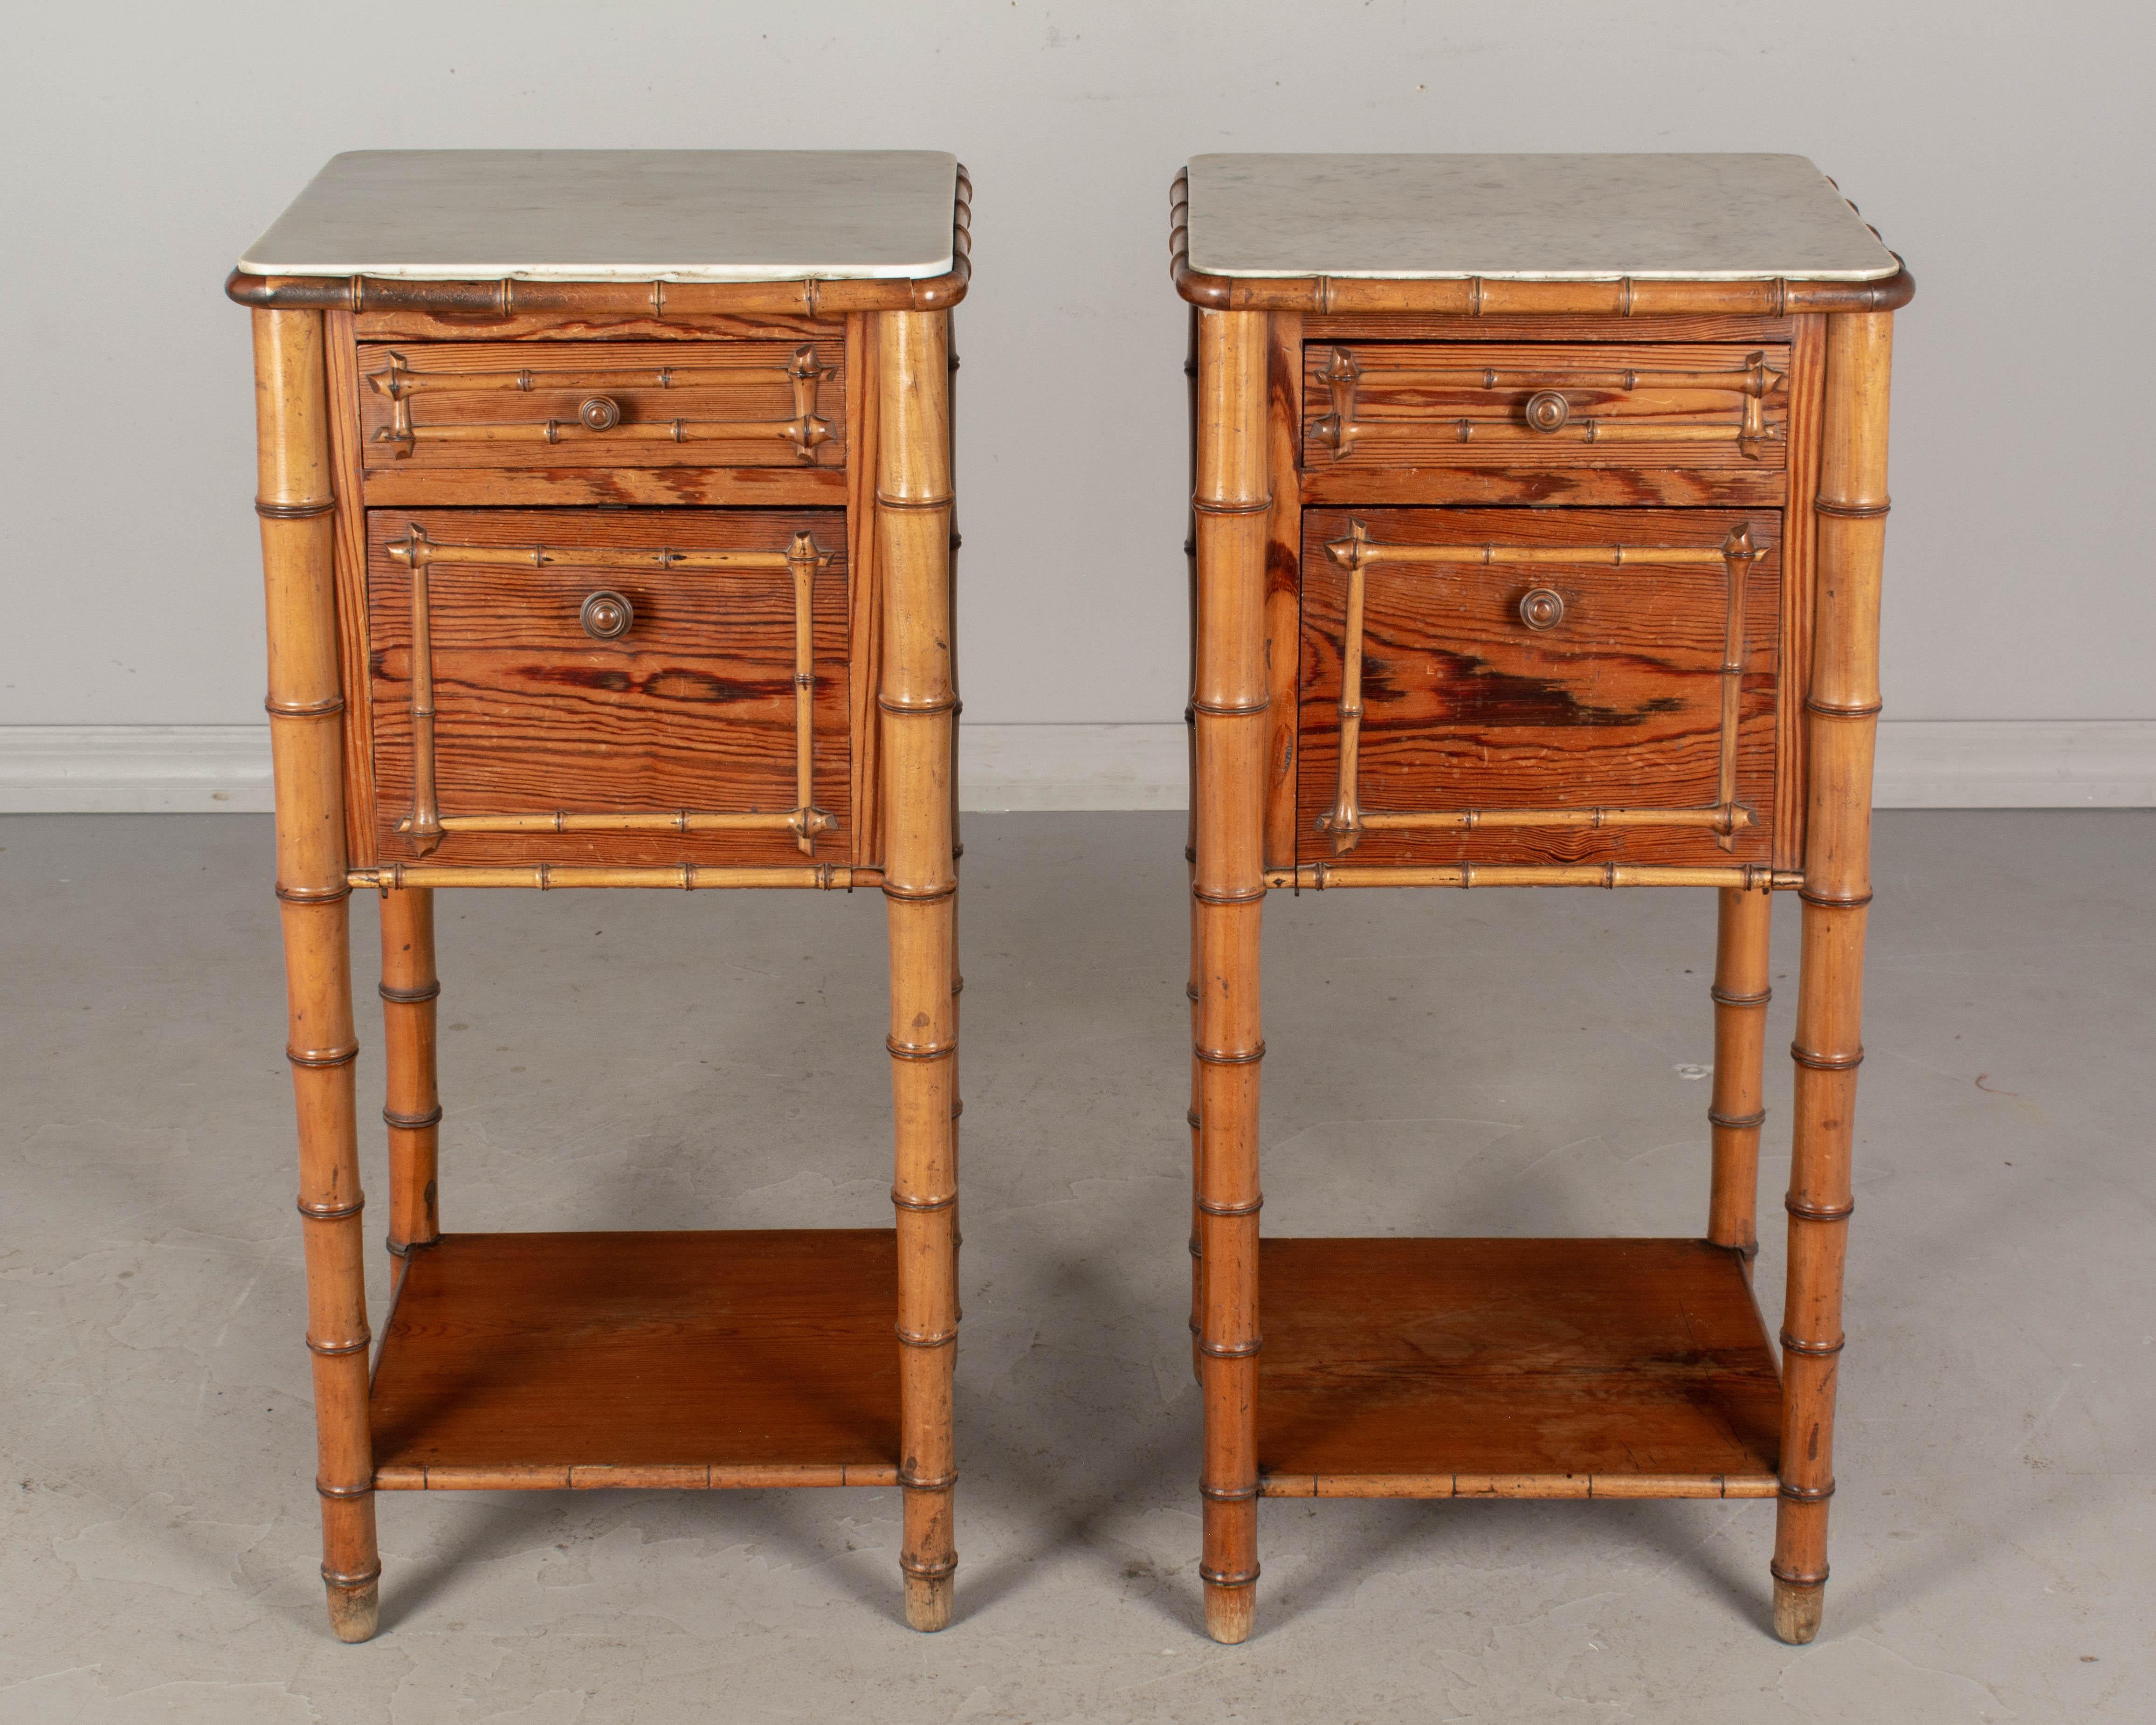 Hand-Crafted 19th Century French Faux Bamboo Side Tables, a Pair